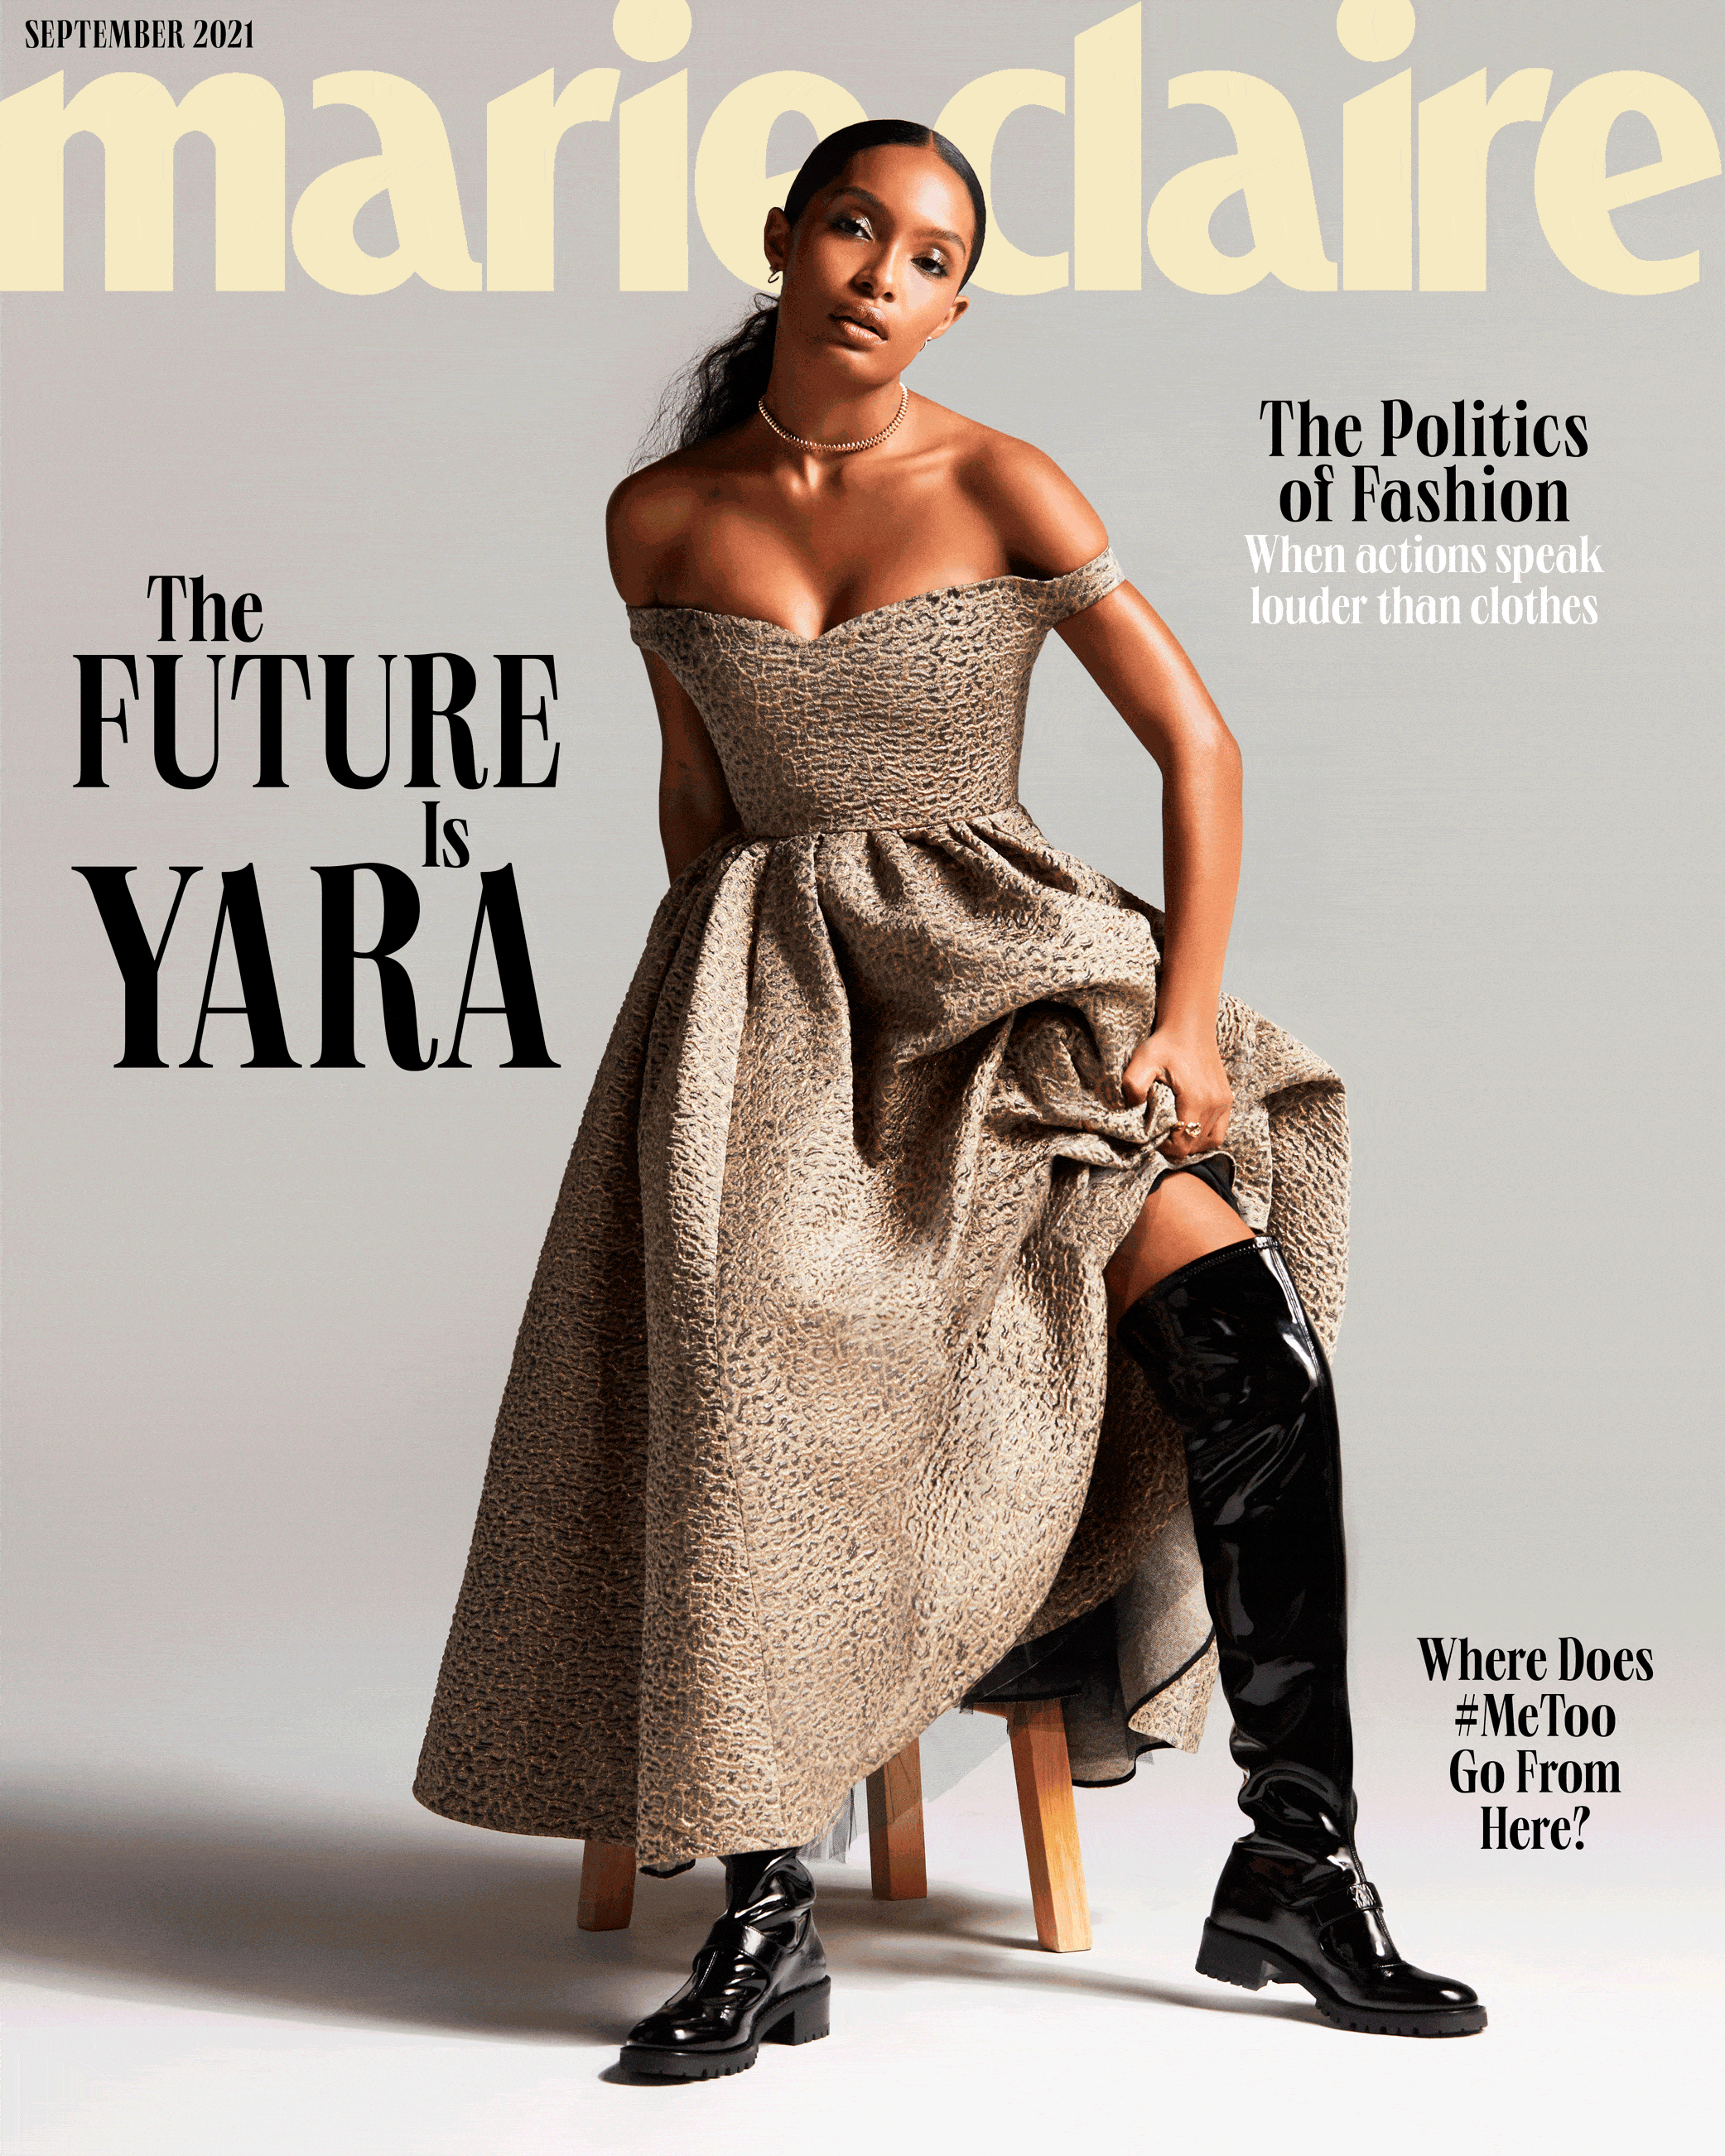 Marie Claire Sept 2021